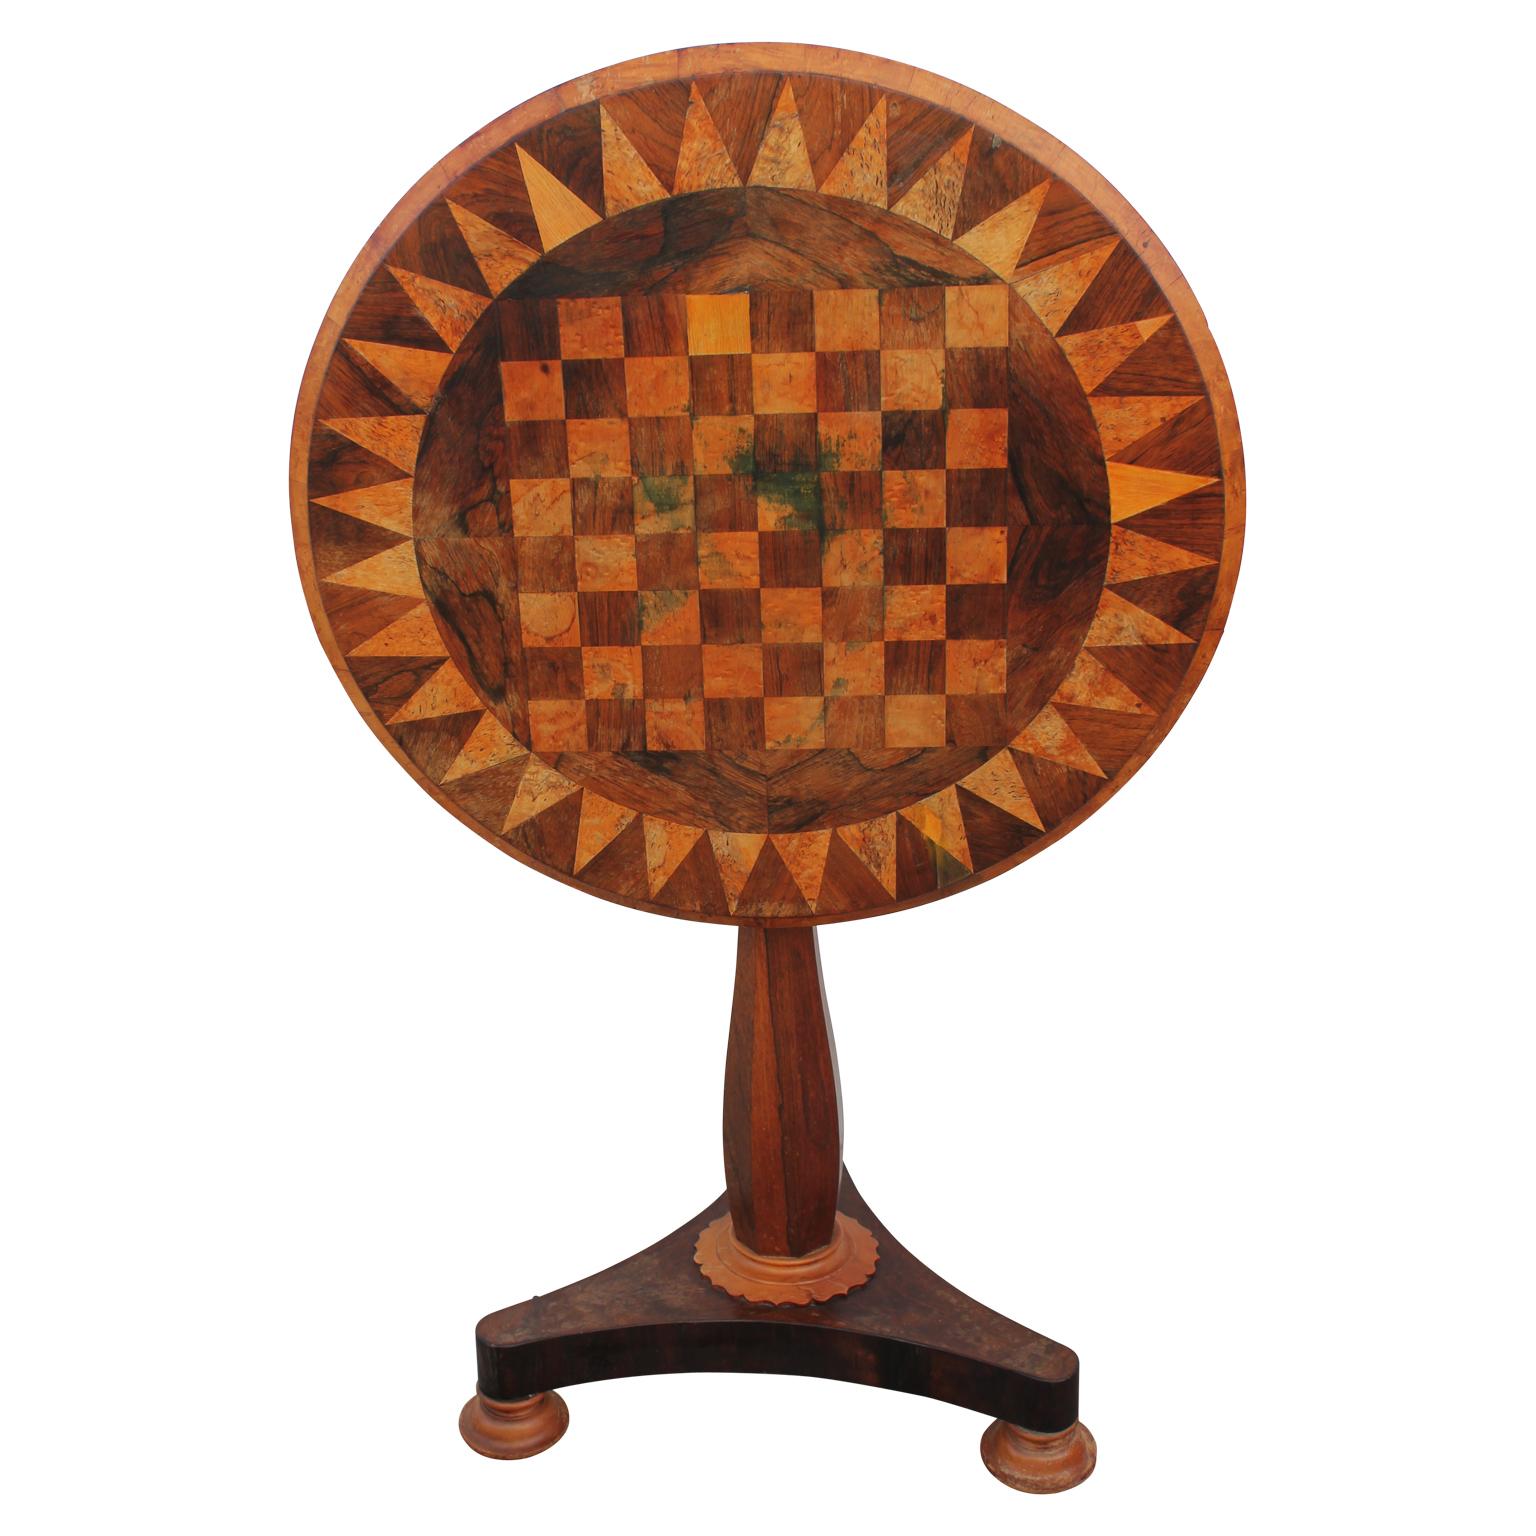 Beautiful round empire tilt top parquetry game or chess table. Visible ink stains on top of table (pictured),

circa 1840s.